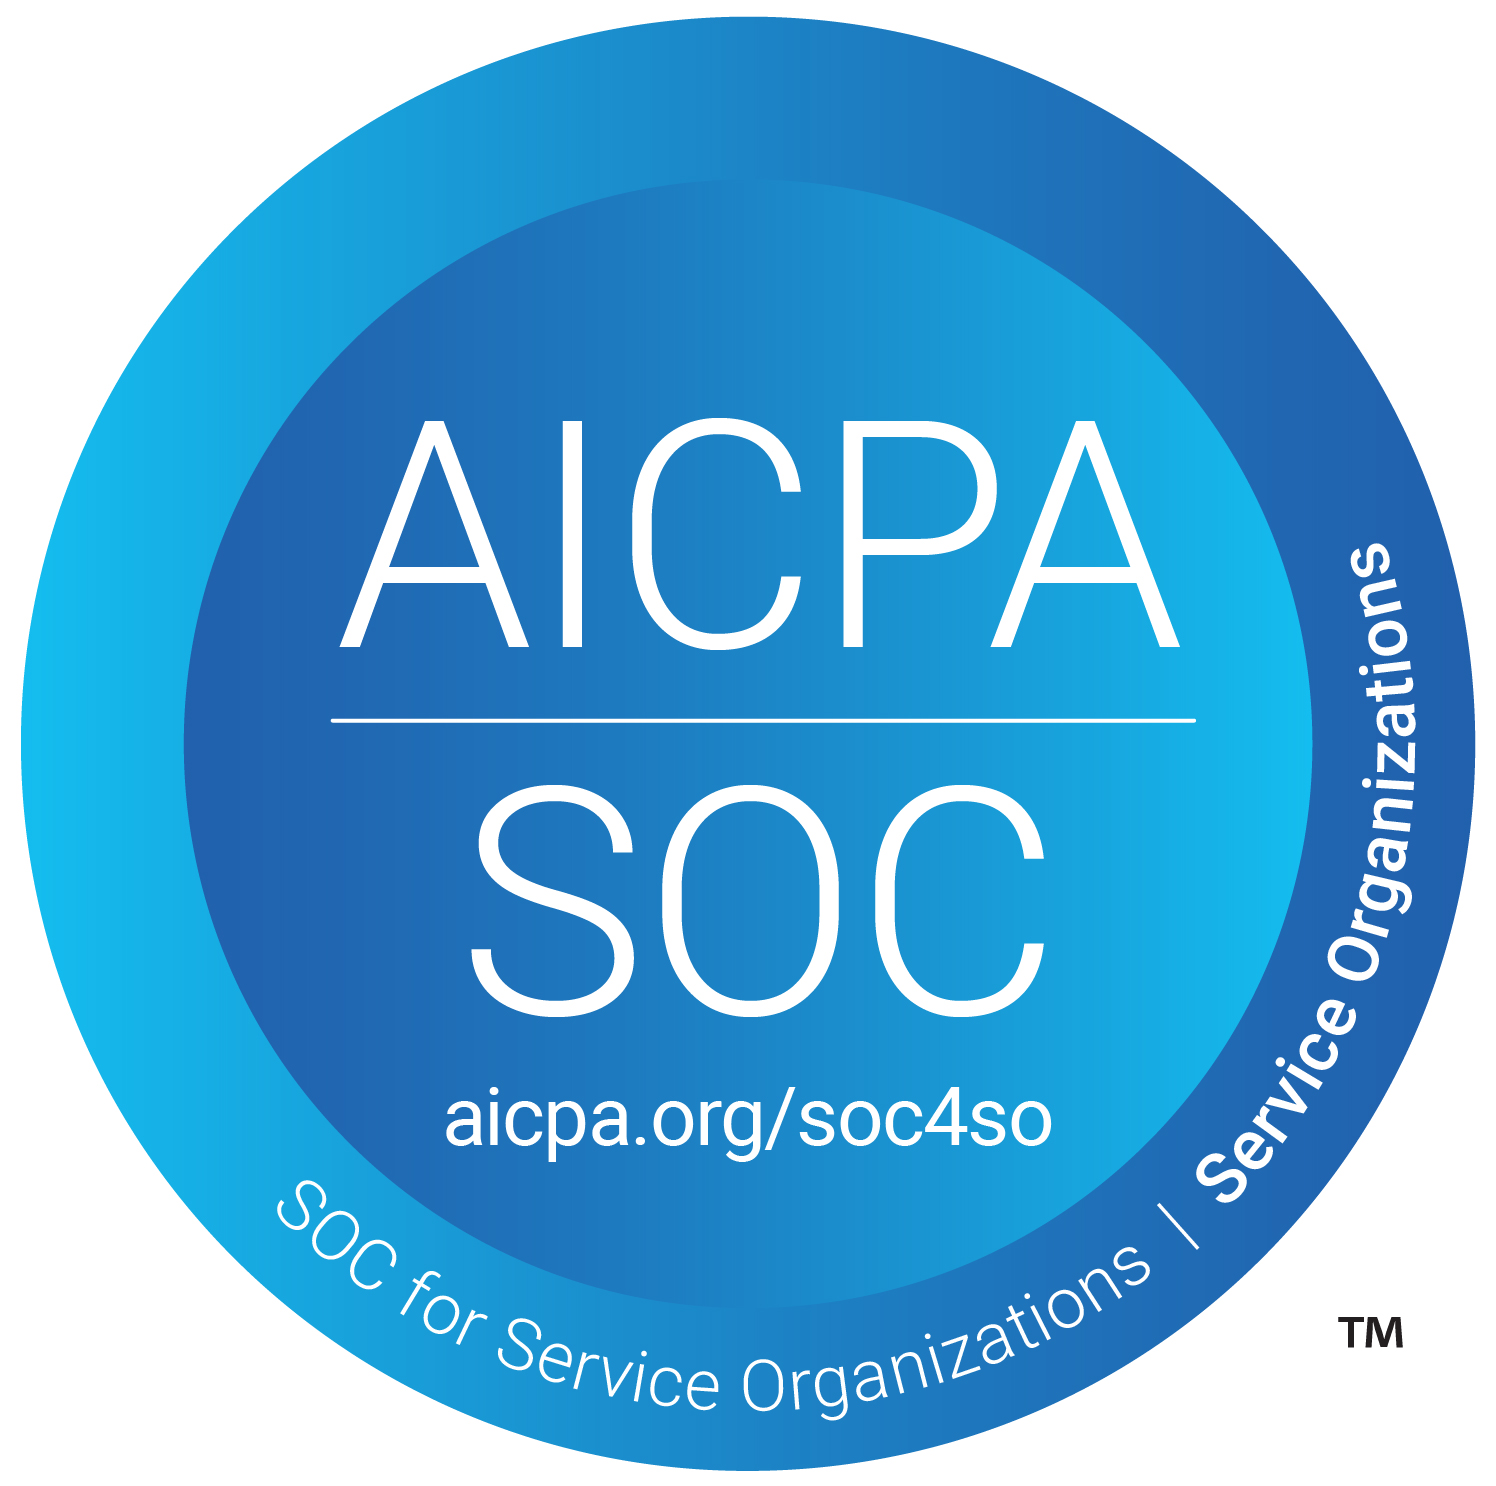 AICPA Logo, links to the SOC 4 page on their website